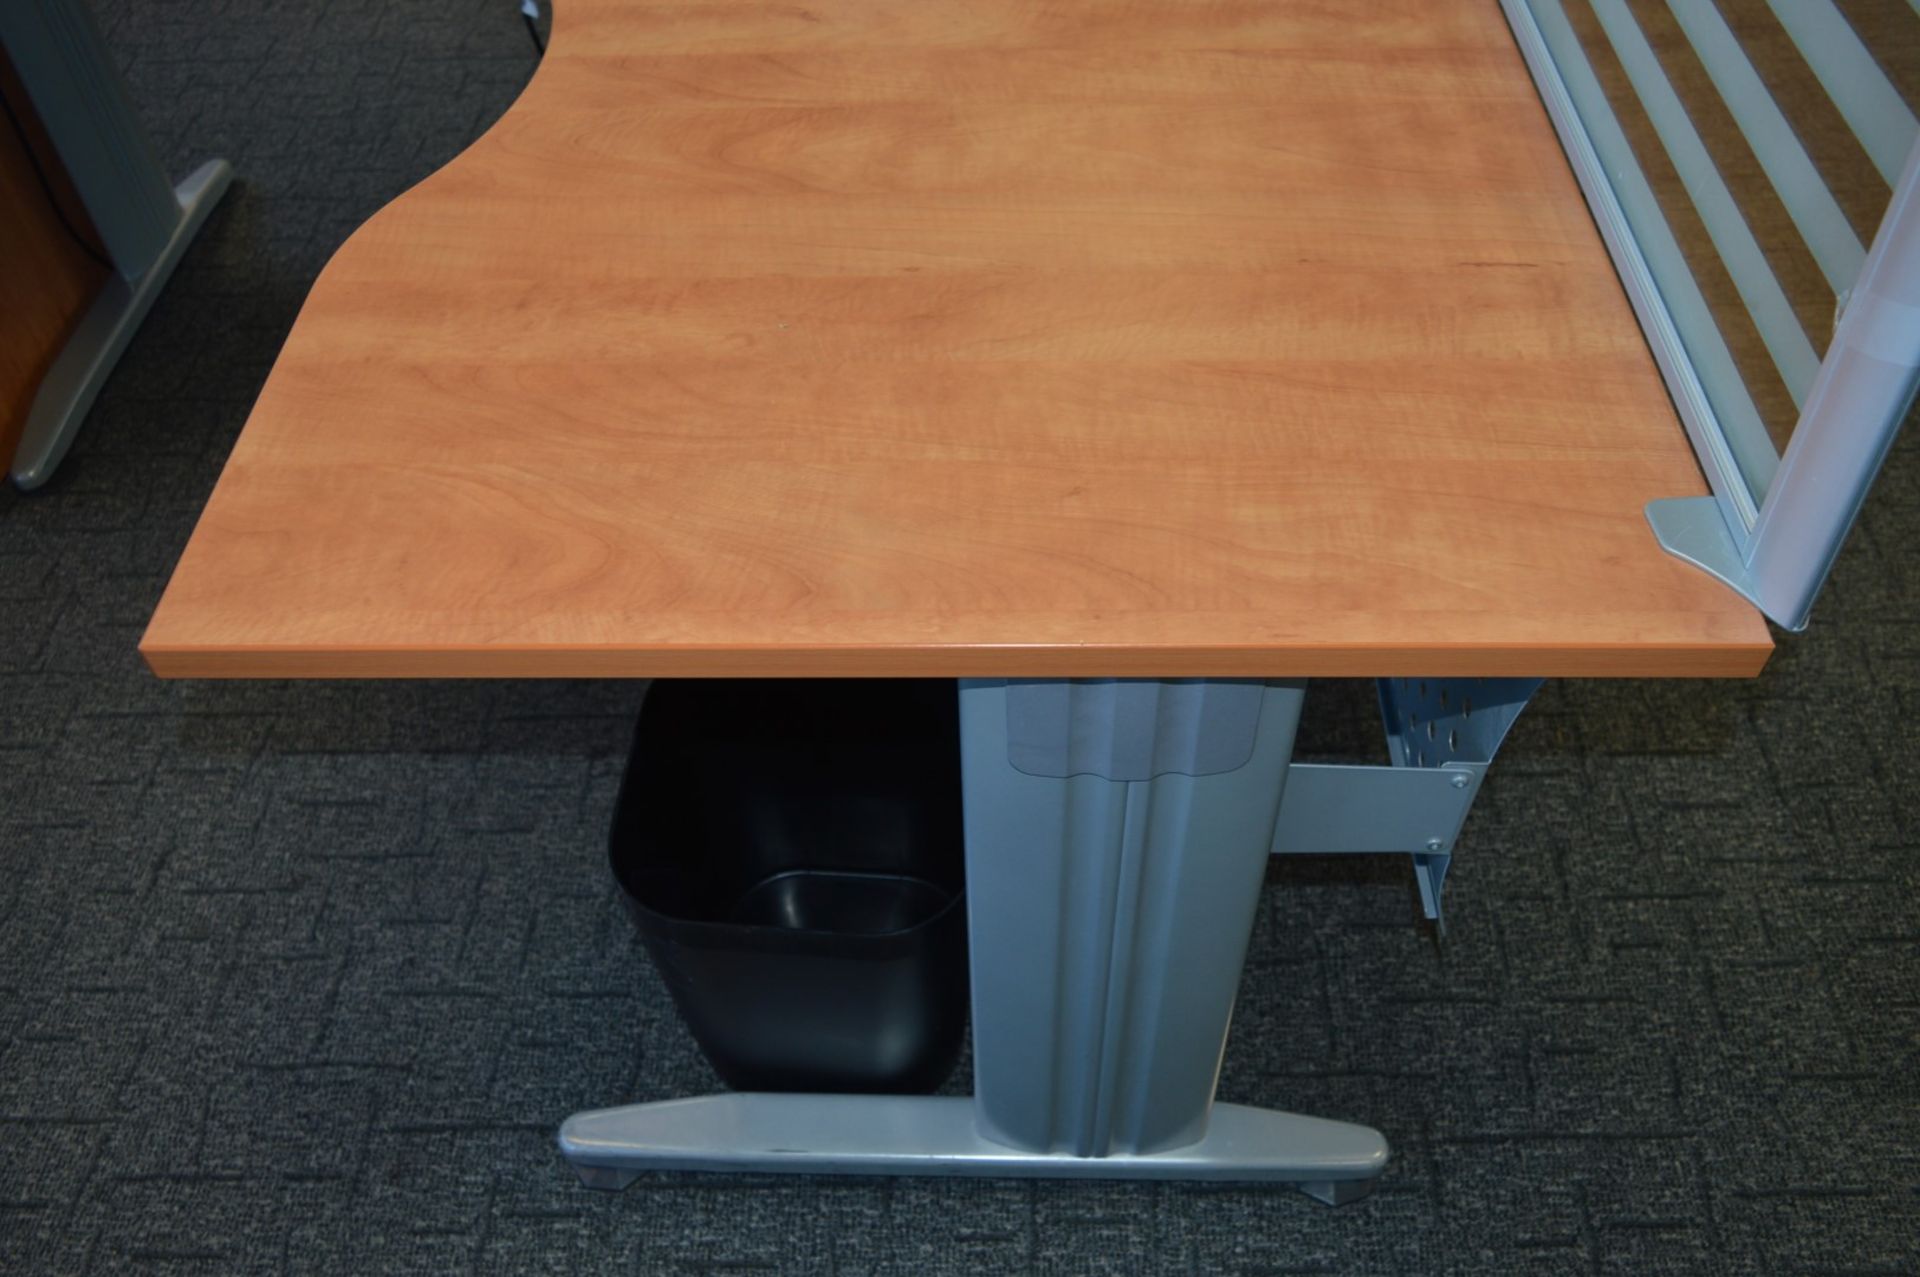 1 x Ergonomical Corner Office Desk With a Beech Finish, Cantilever Grey Coated Base, Cable Tidy - Image 2 of 3